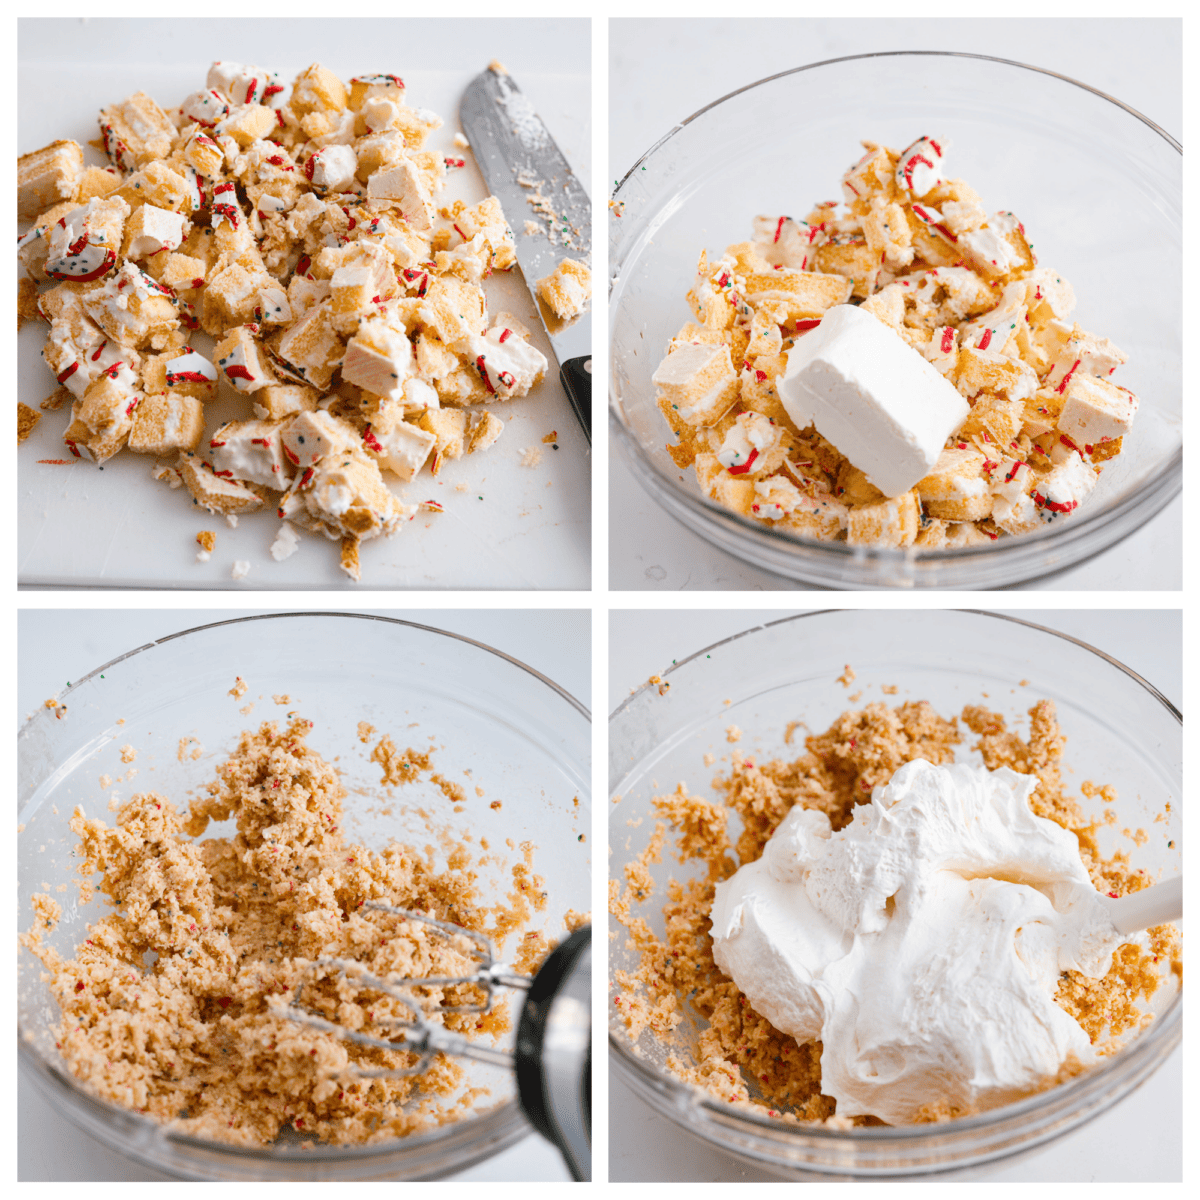 4-photo collage of the snack cakes being chopped up and mixed with the cream cheese and whipped topping.